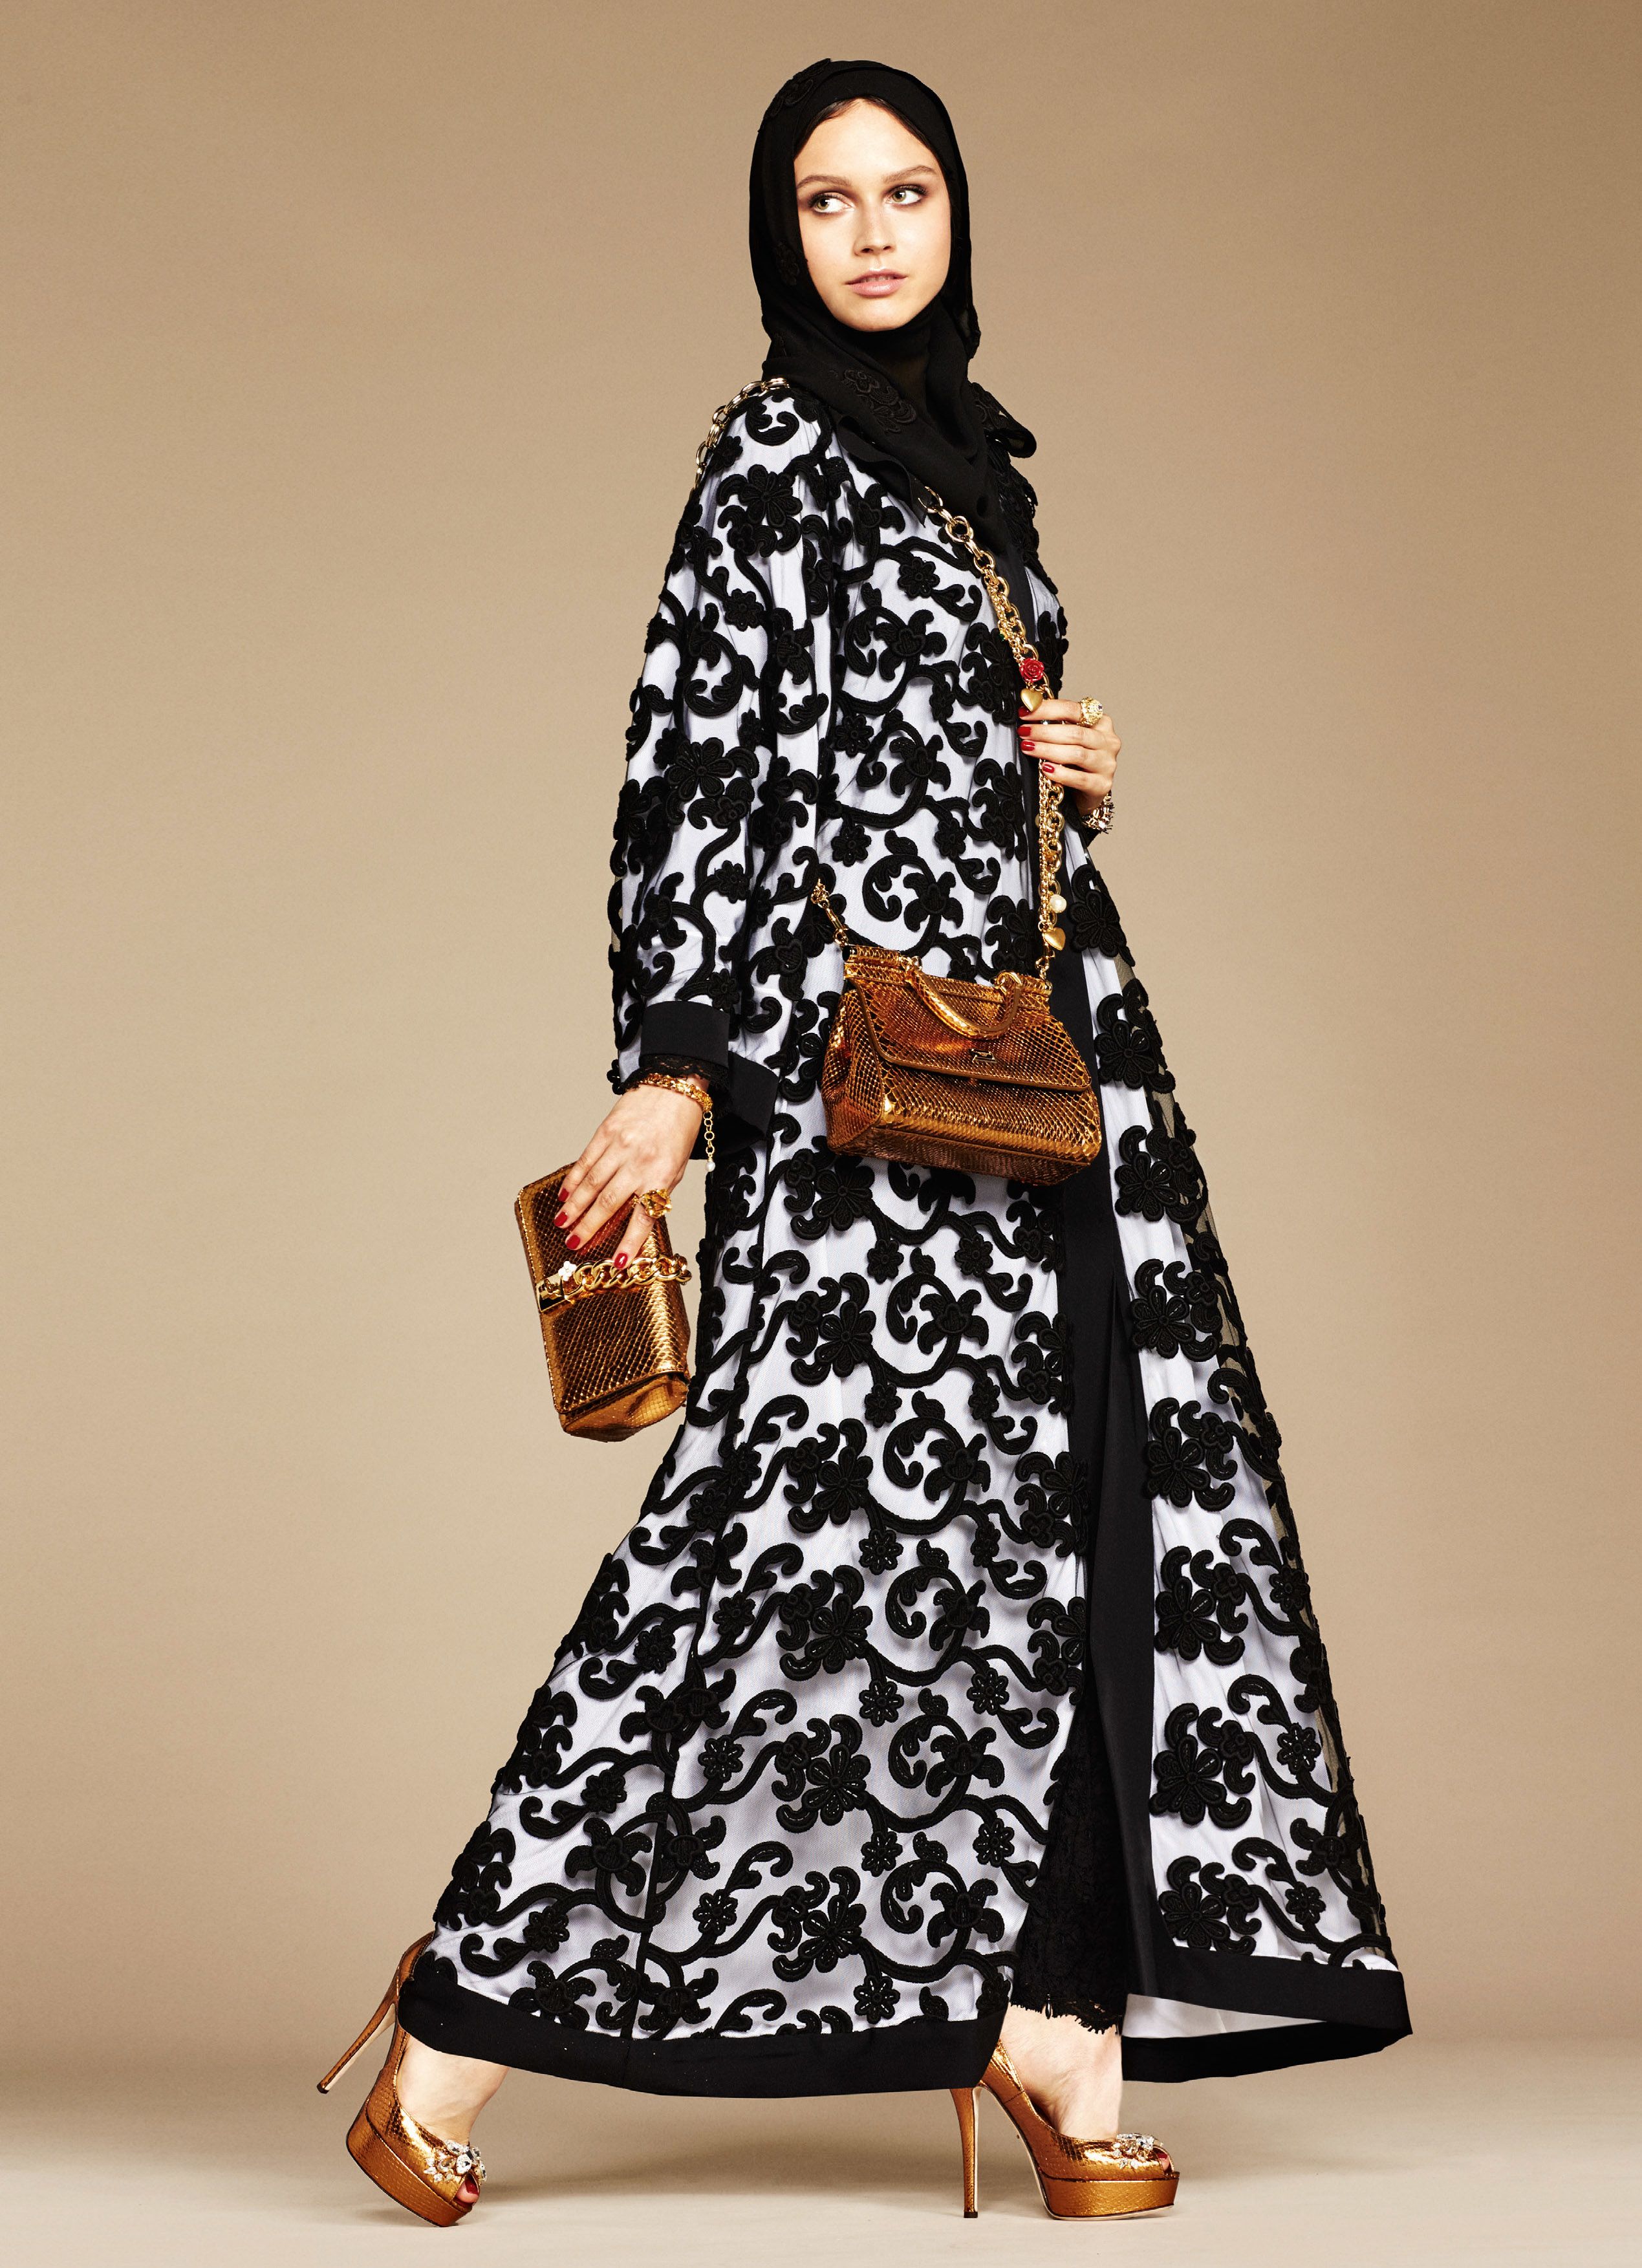 Dolce & Gabbana Debuts New Collection for Muslim Women - The Atlantic